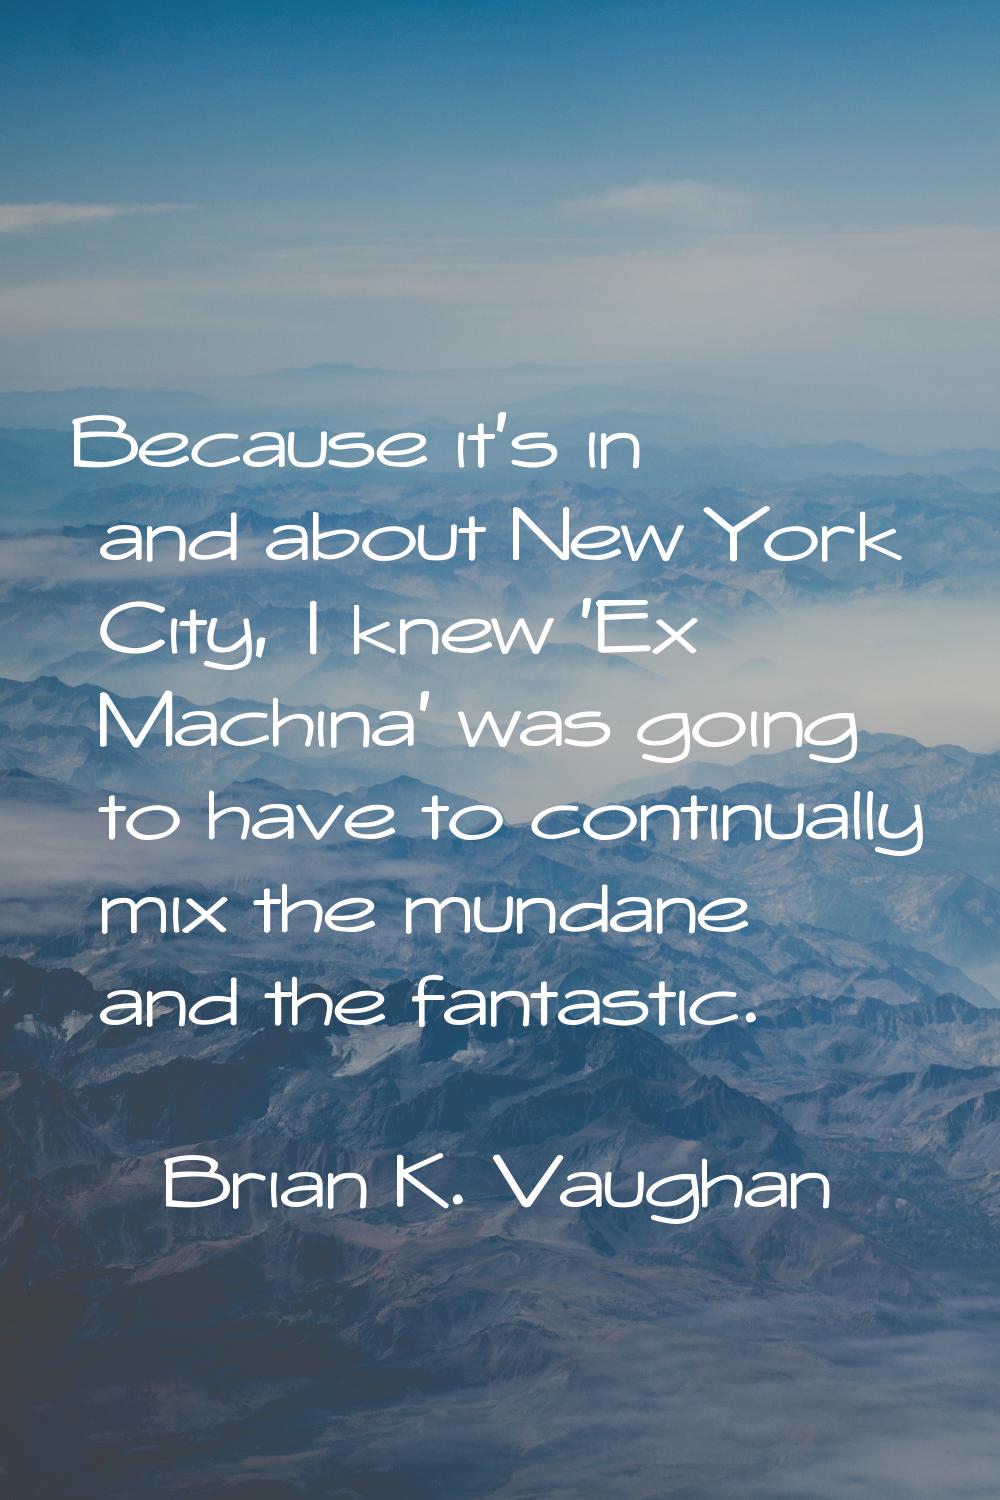 Because it's in and about New York City, I knew 'Ex Machina' was going to have to continually mix t